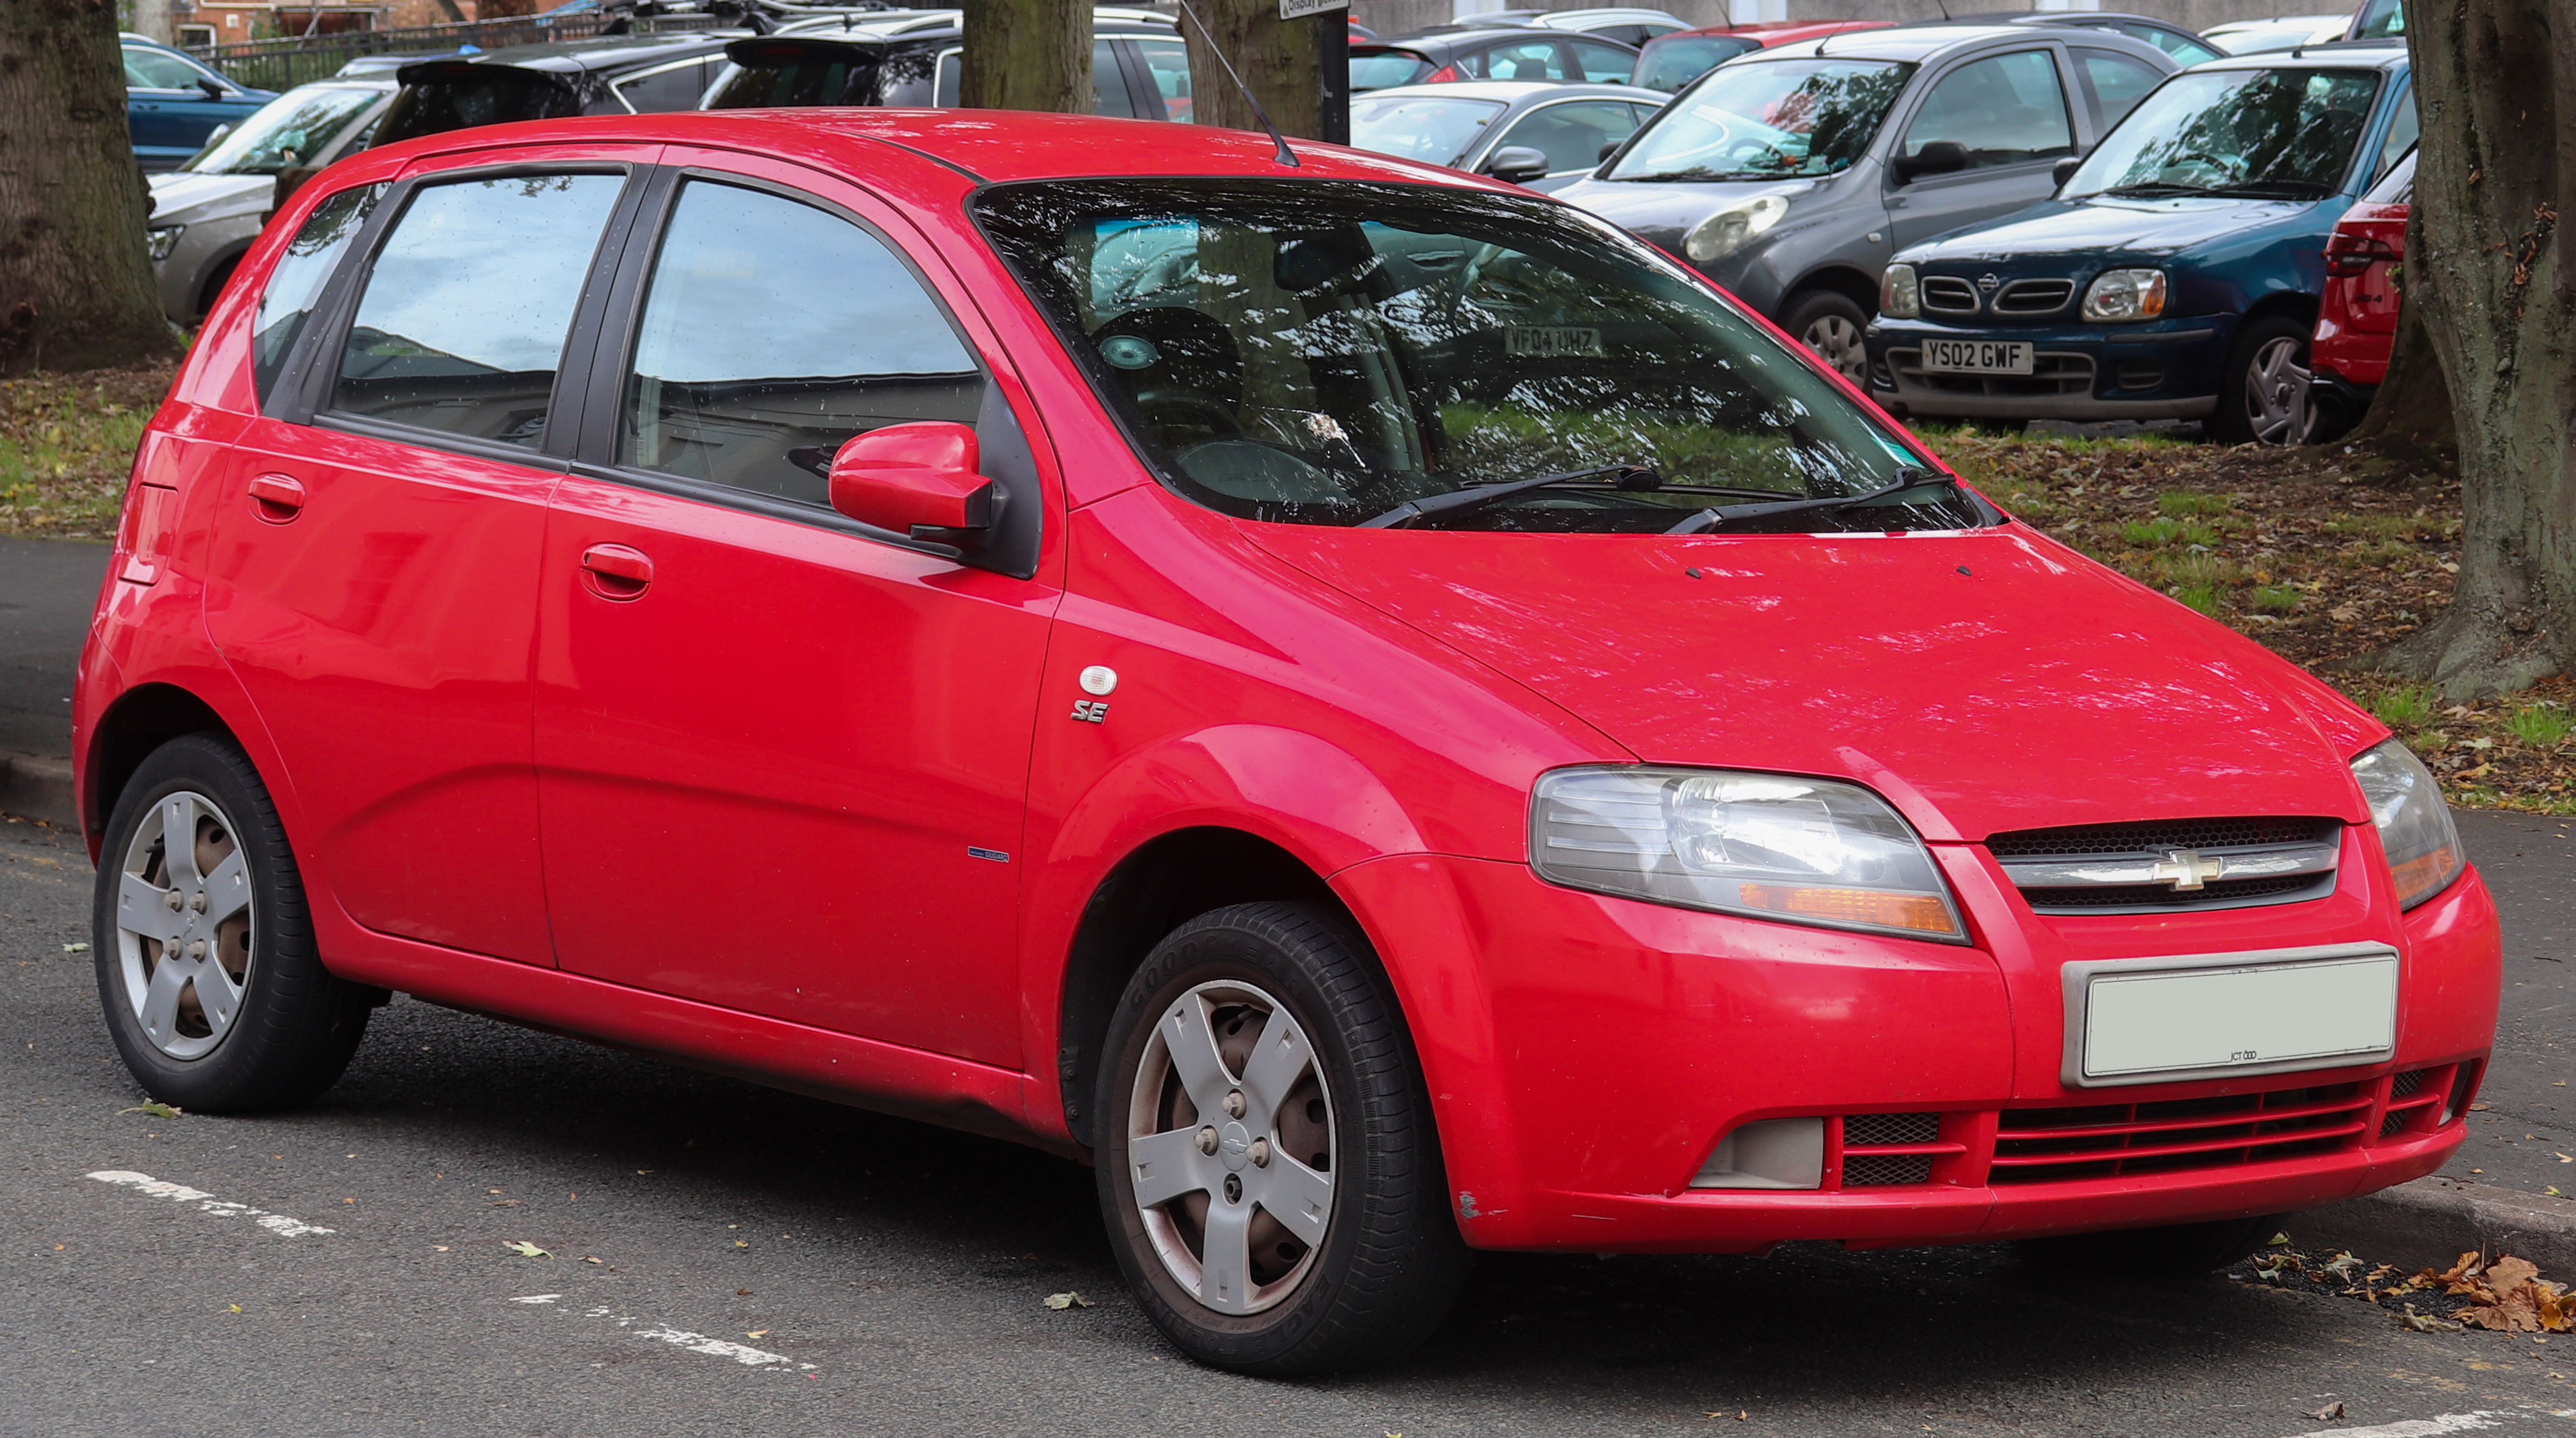 a Picture of a red 2007 Chevrolet Kalos (Aveo).